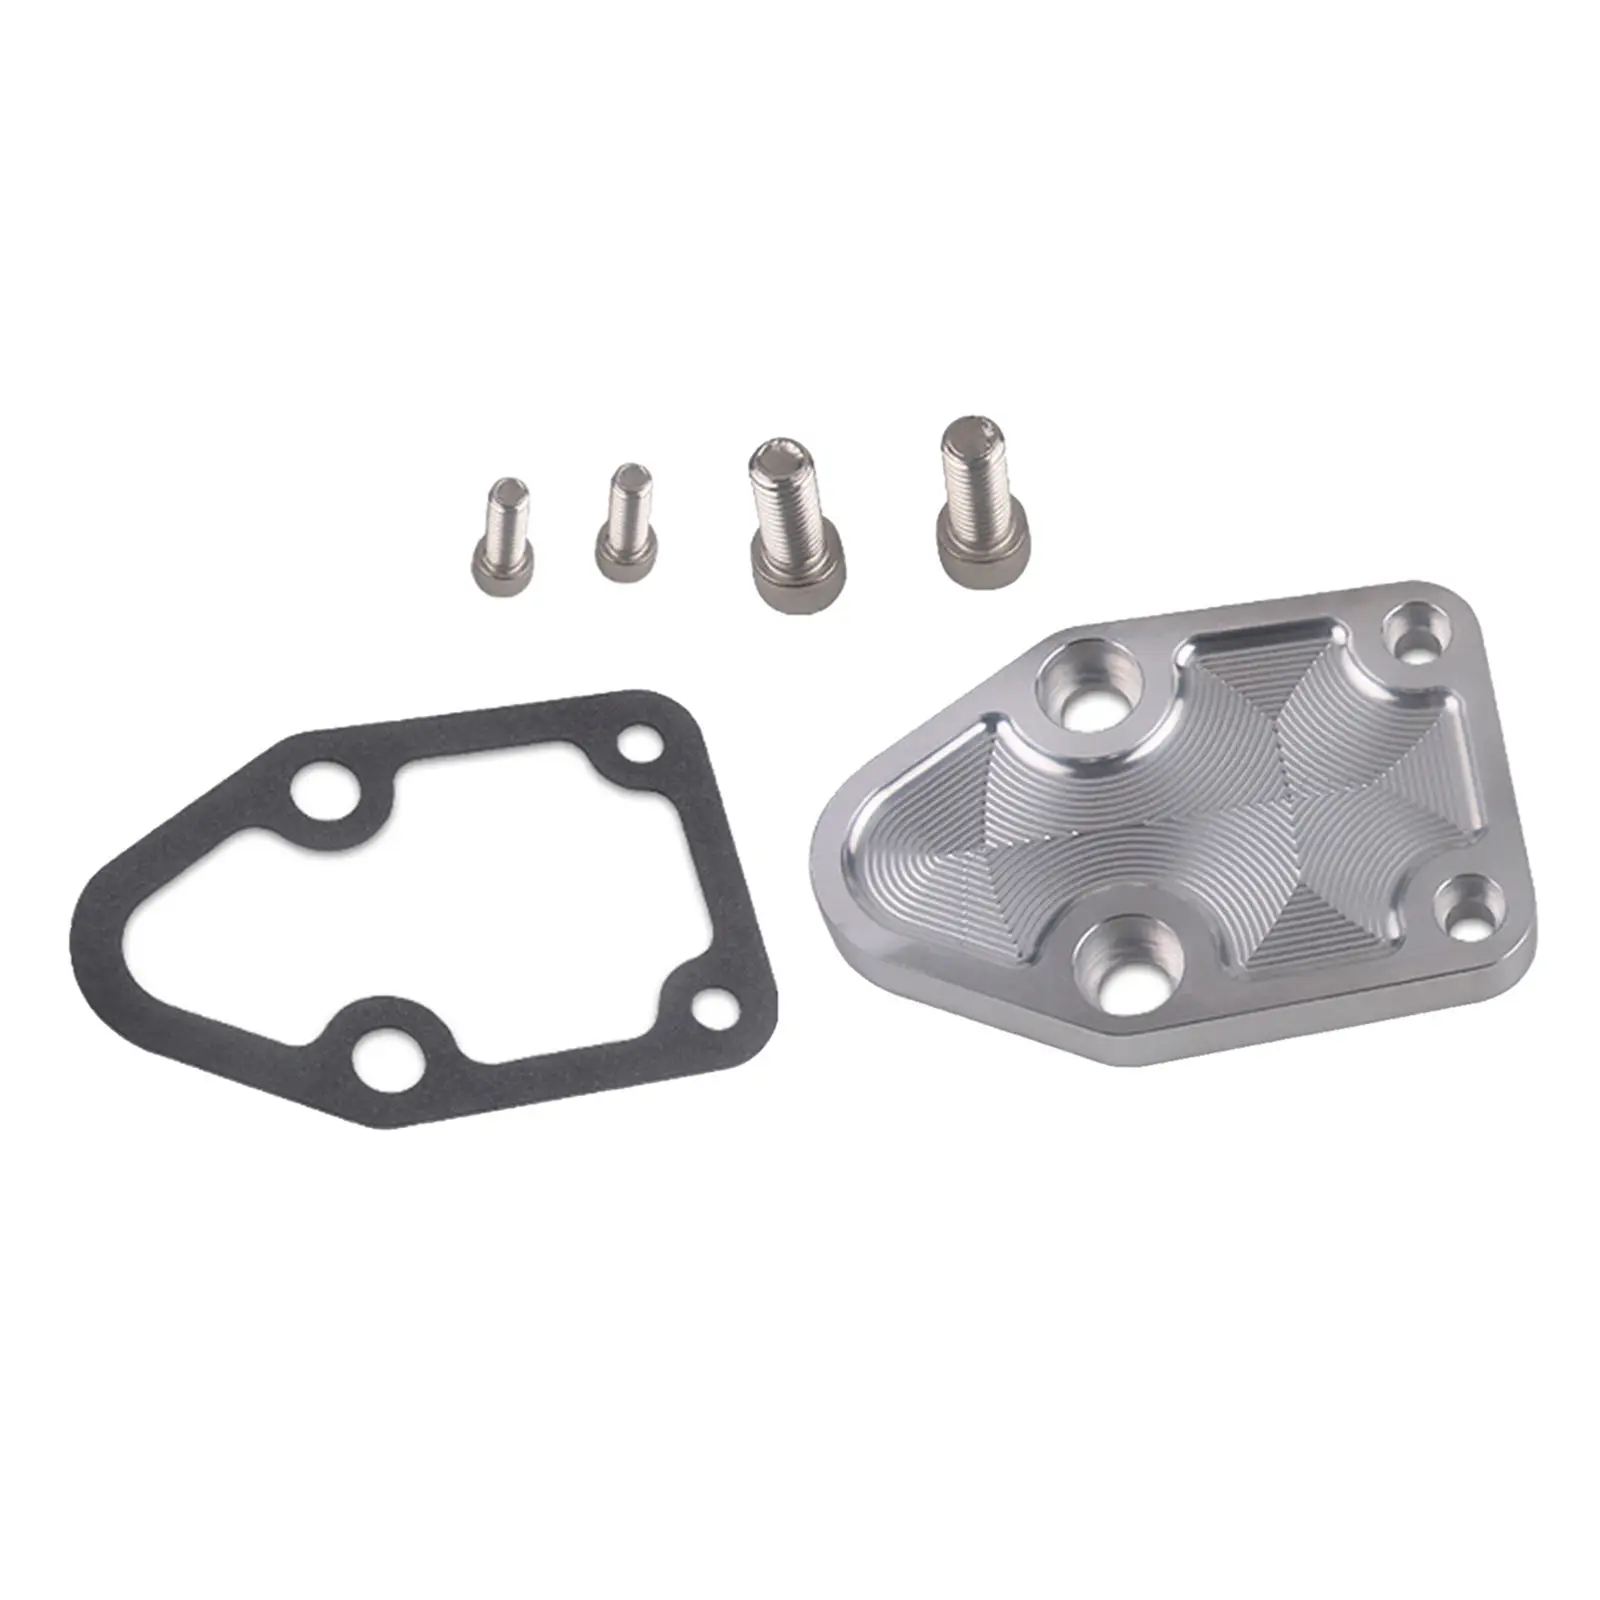 Fuel Pump Plate Kit with Gasket Replace for CHEVY SB 283 327 350 383 400